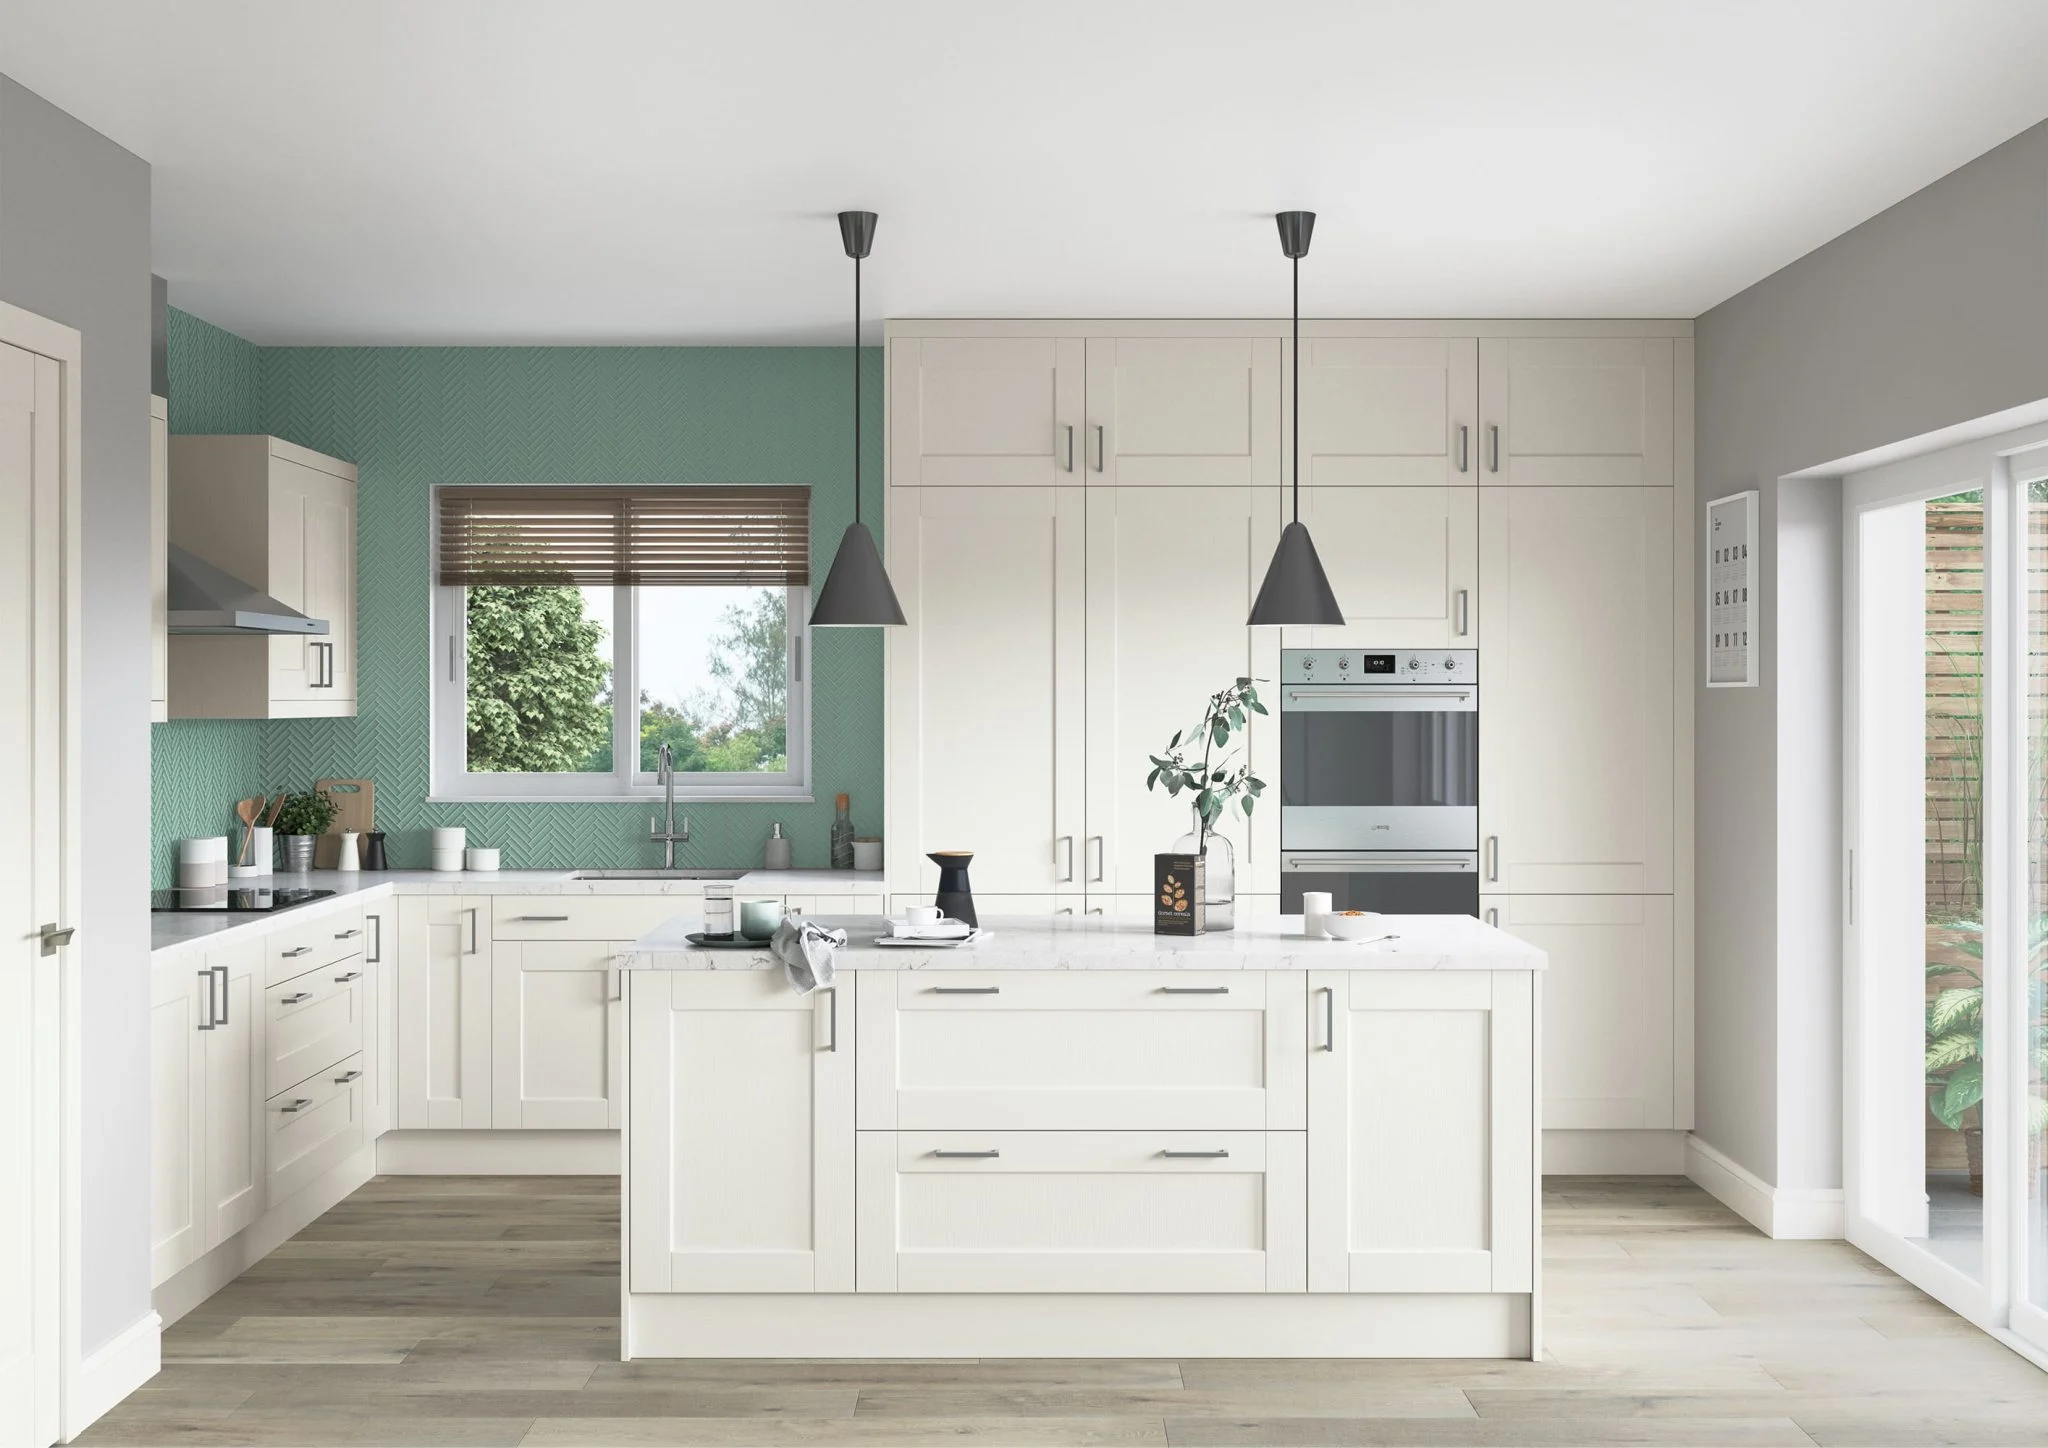 kensington-porcelain-classic-traditional-kitchen-ufrom-2048x1448